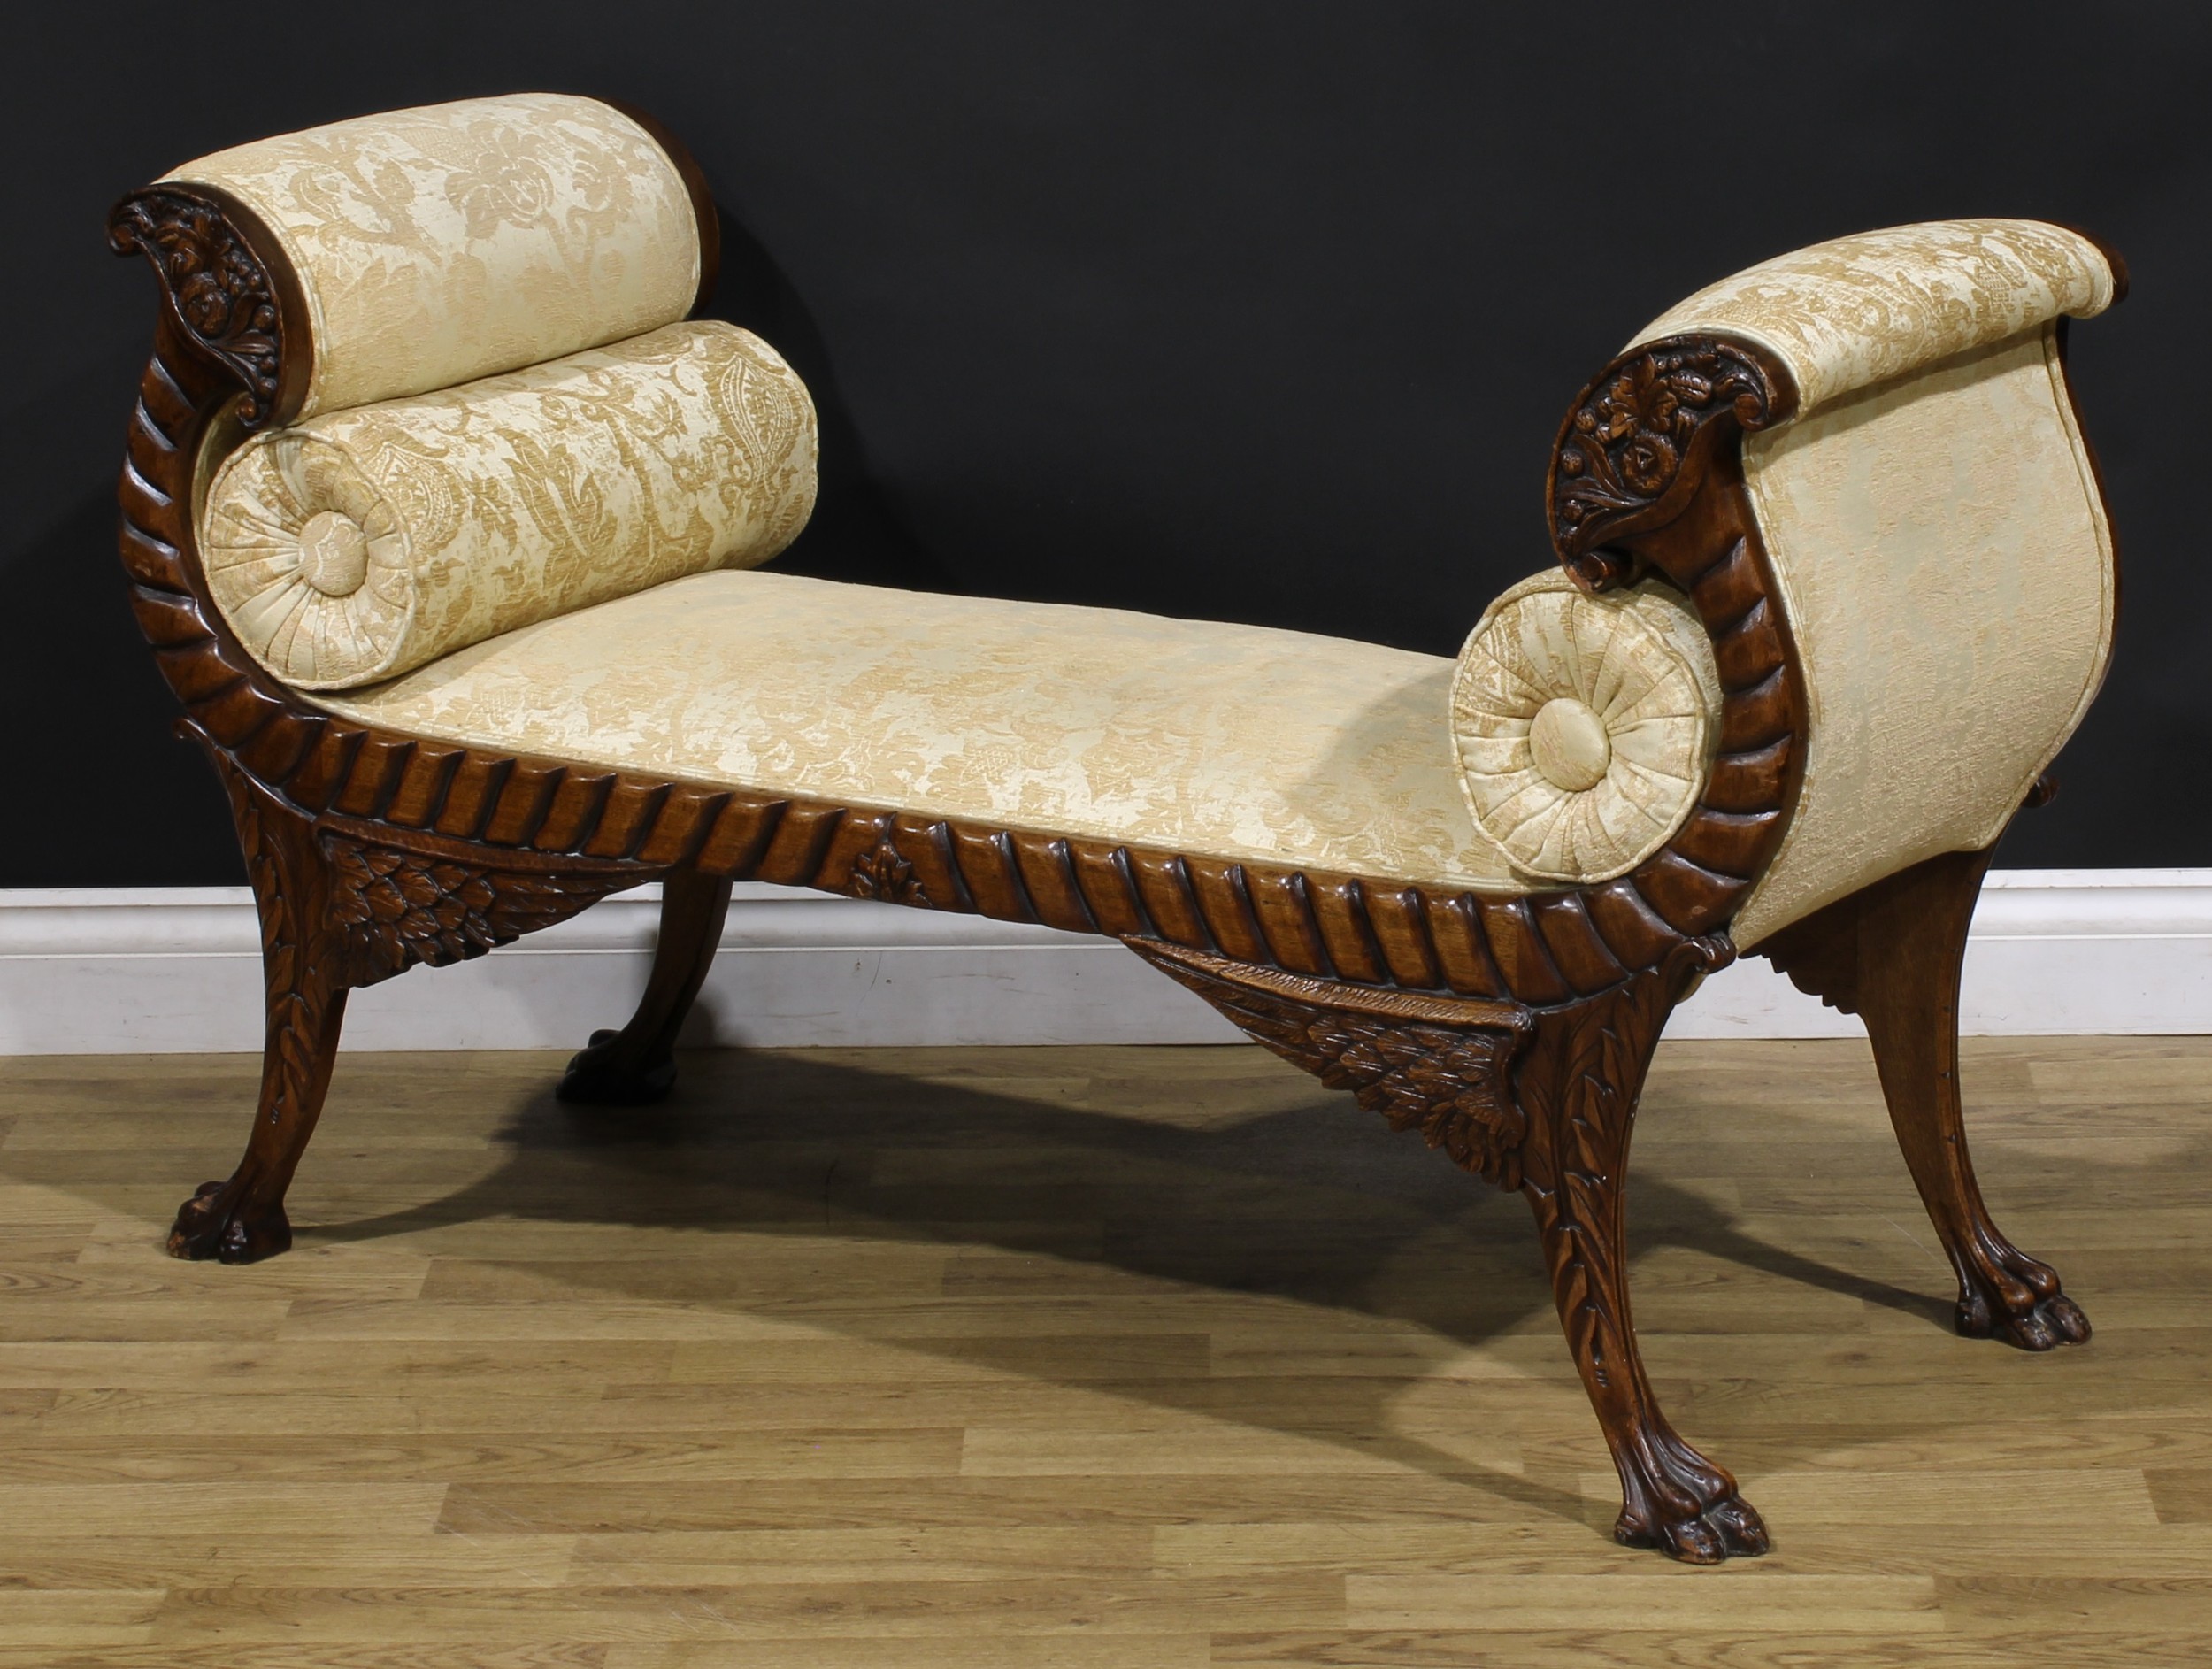 An American Empire Revival neoclassical mahogany window seat, Récamier-form arms carved as - Image 3 of 4